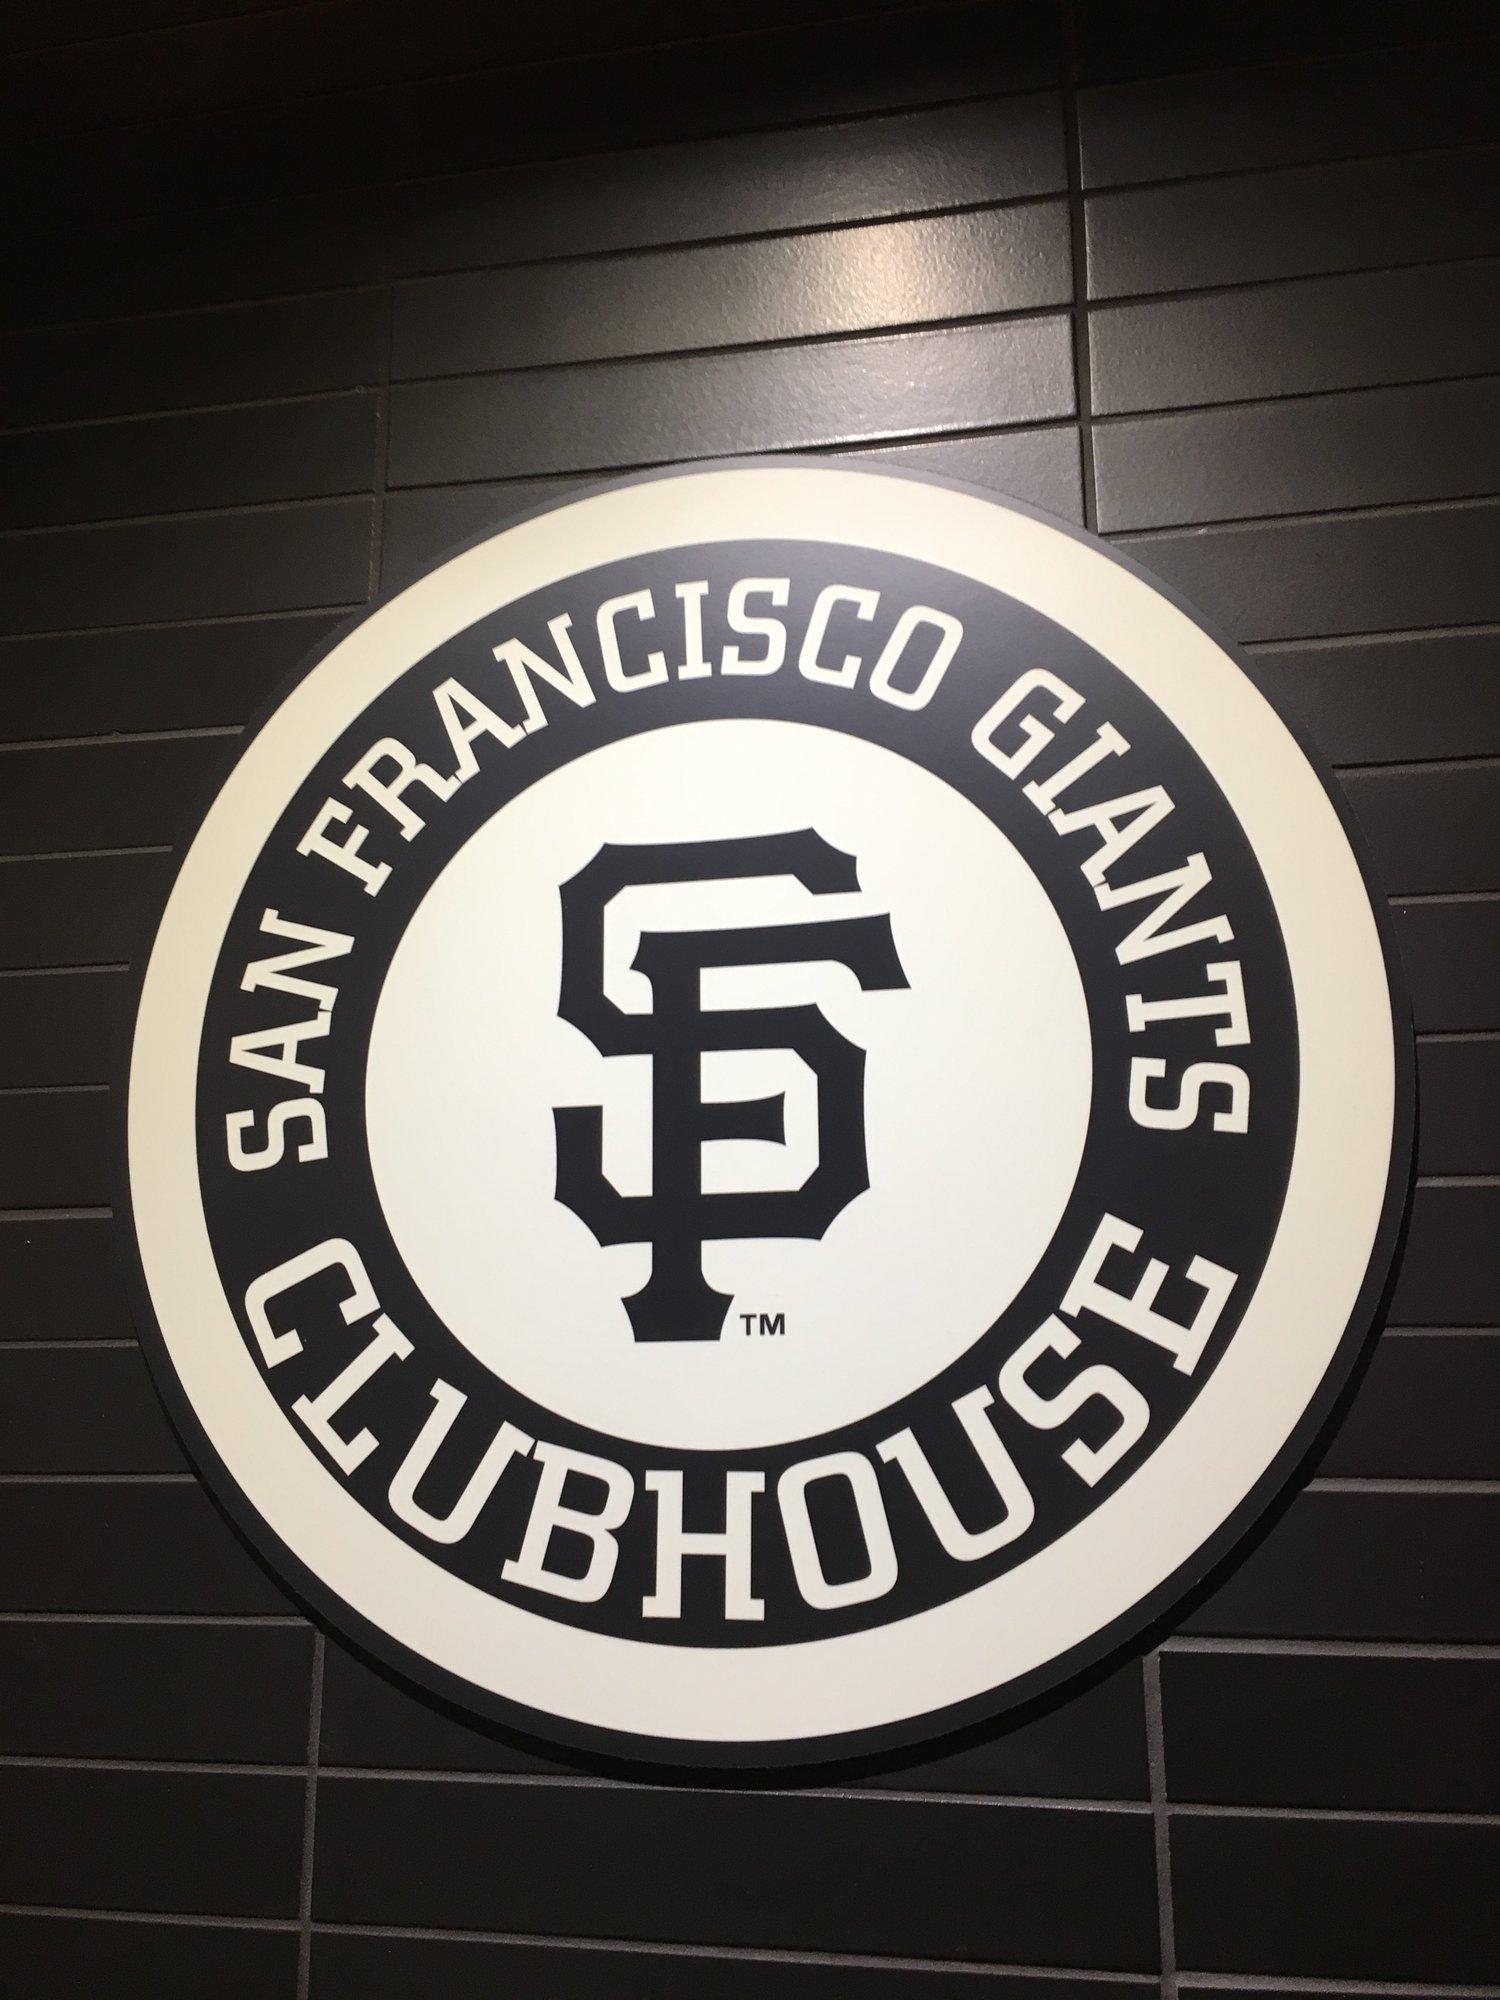 San Francisco Giants Clubhouse image 17 of 19